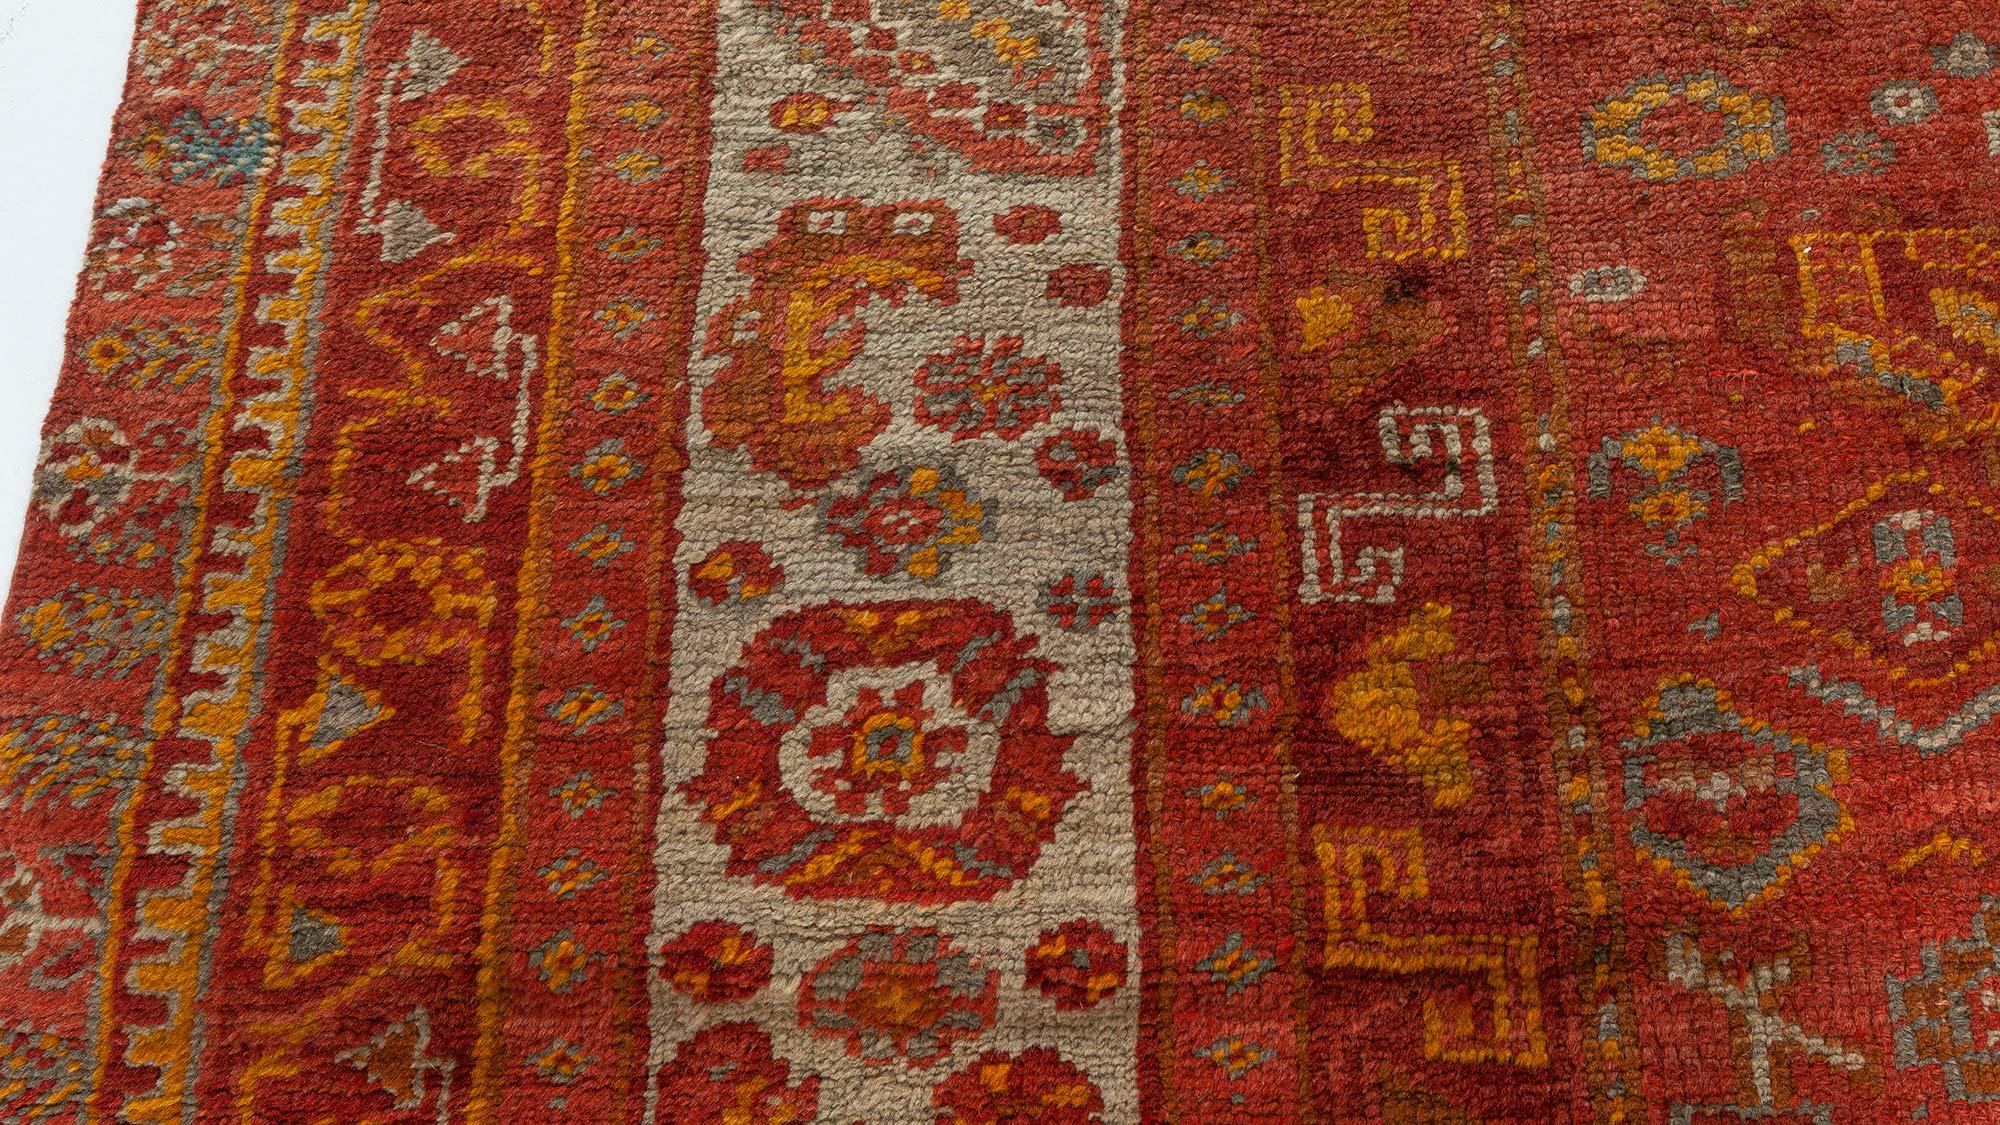 Mid-20th Century red and yellow Oushak handmade wool rug
Size: 8'4